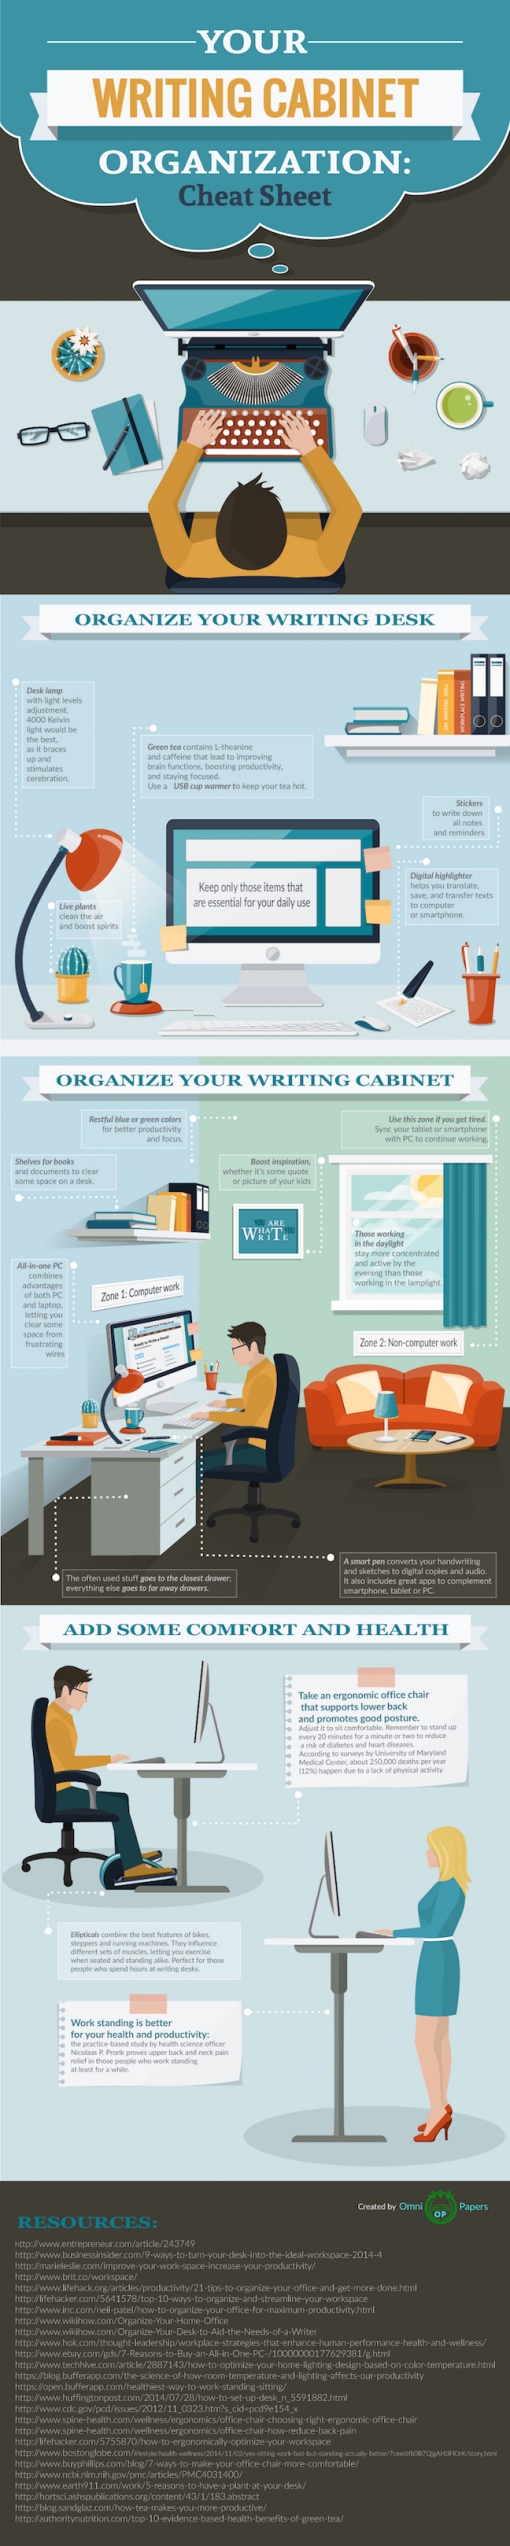 your-writing-cabinet-organization